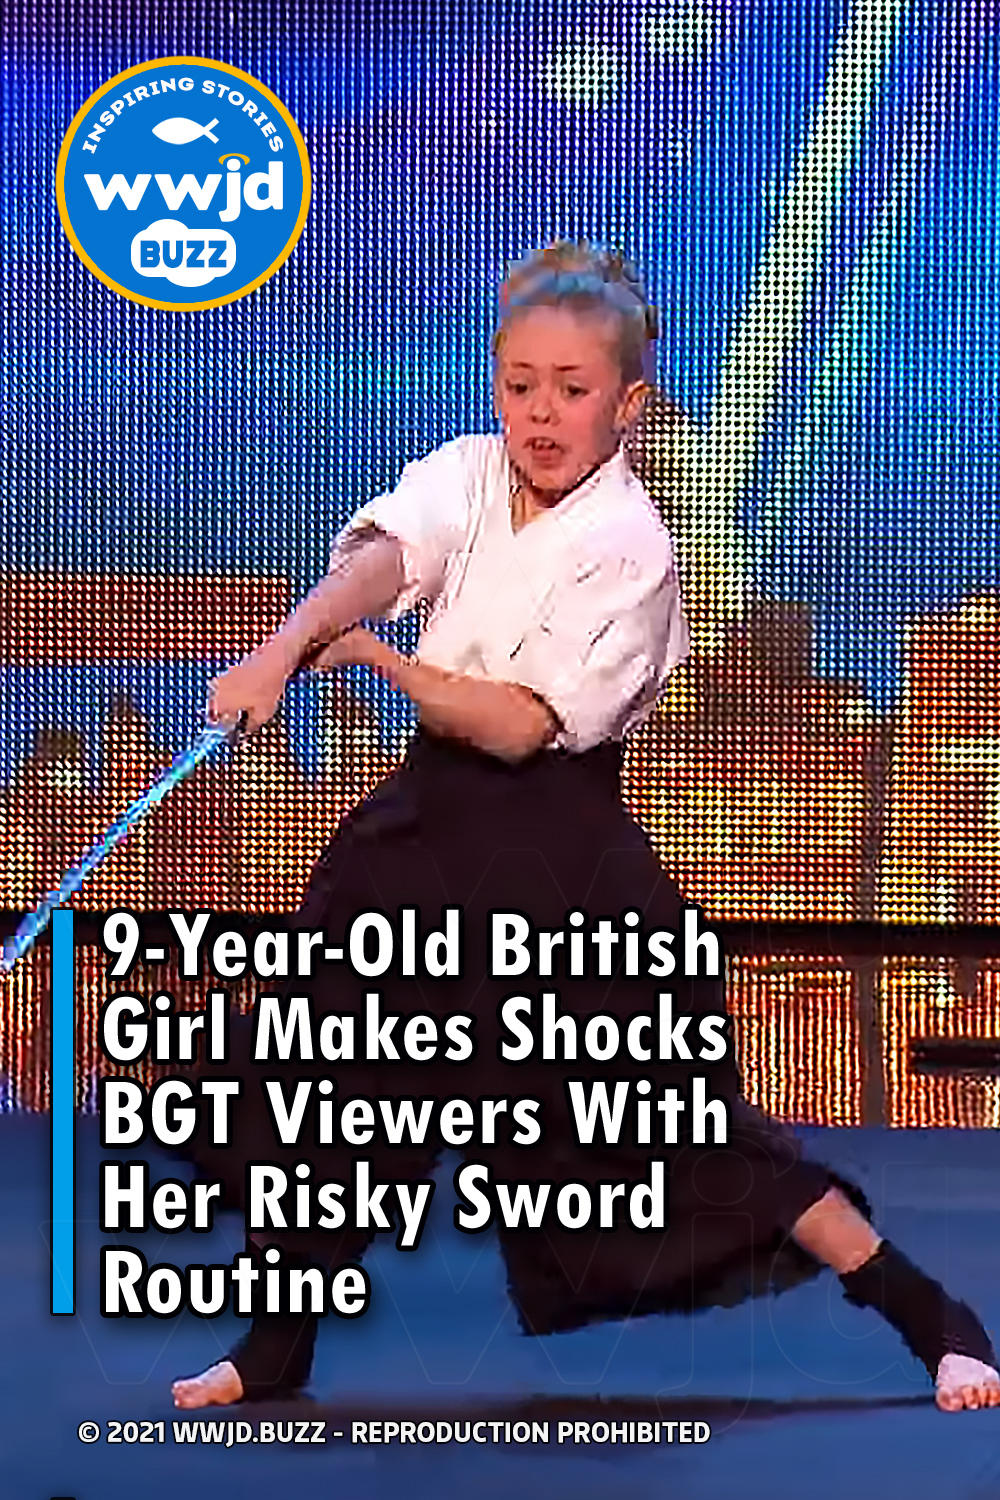 9-Year-Old British Girl Makes Shocks BGT Viewers With Her Risky Sword Routine